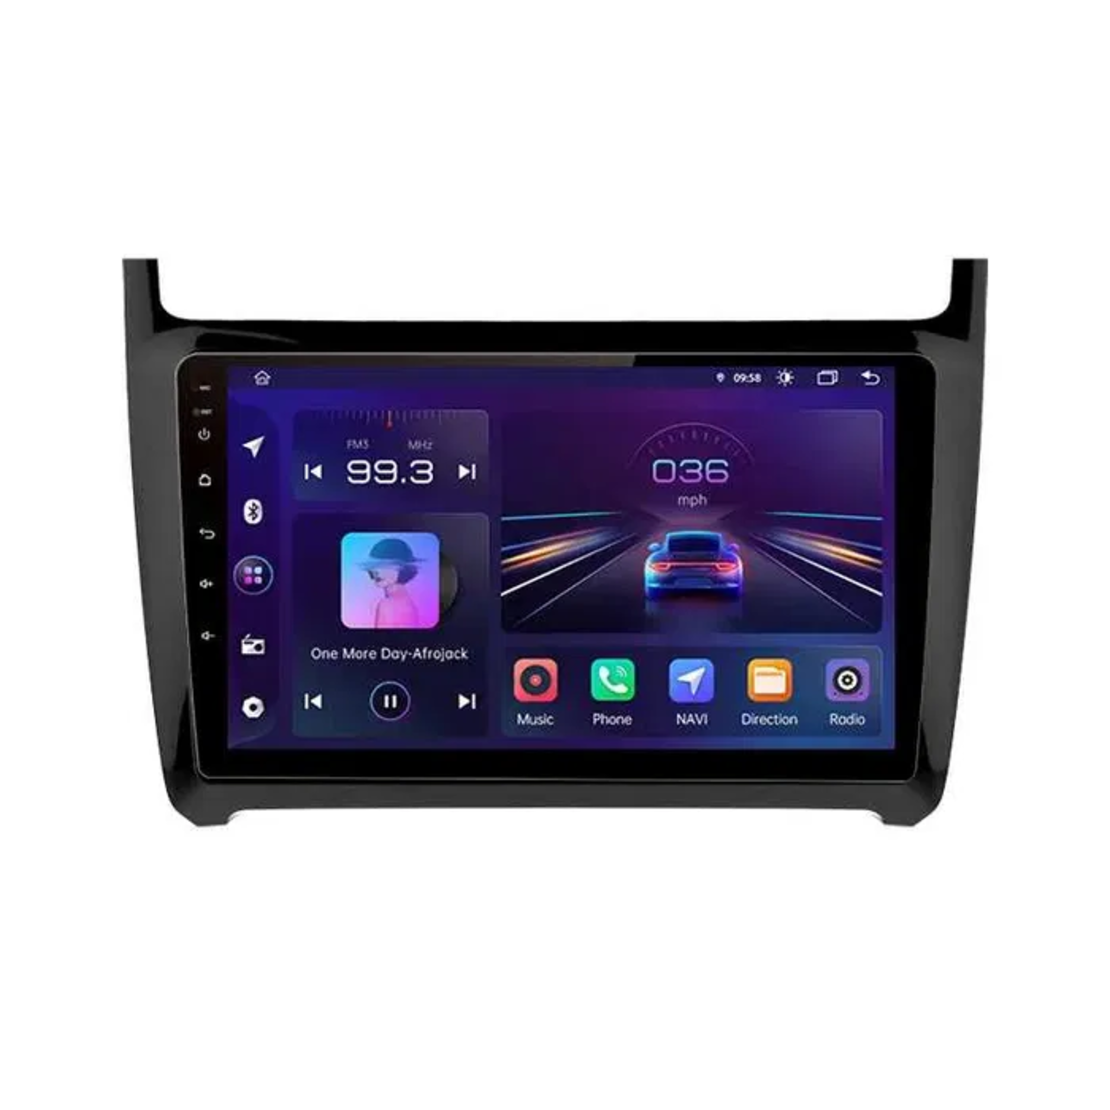 VW POLO 2009-2020 Android Multimedia/Navigation